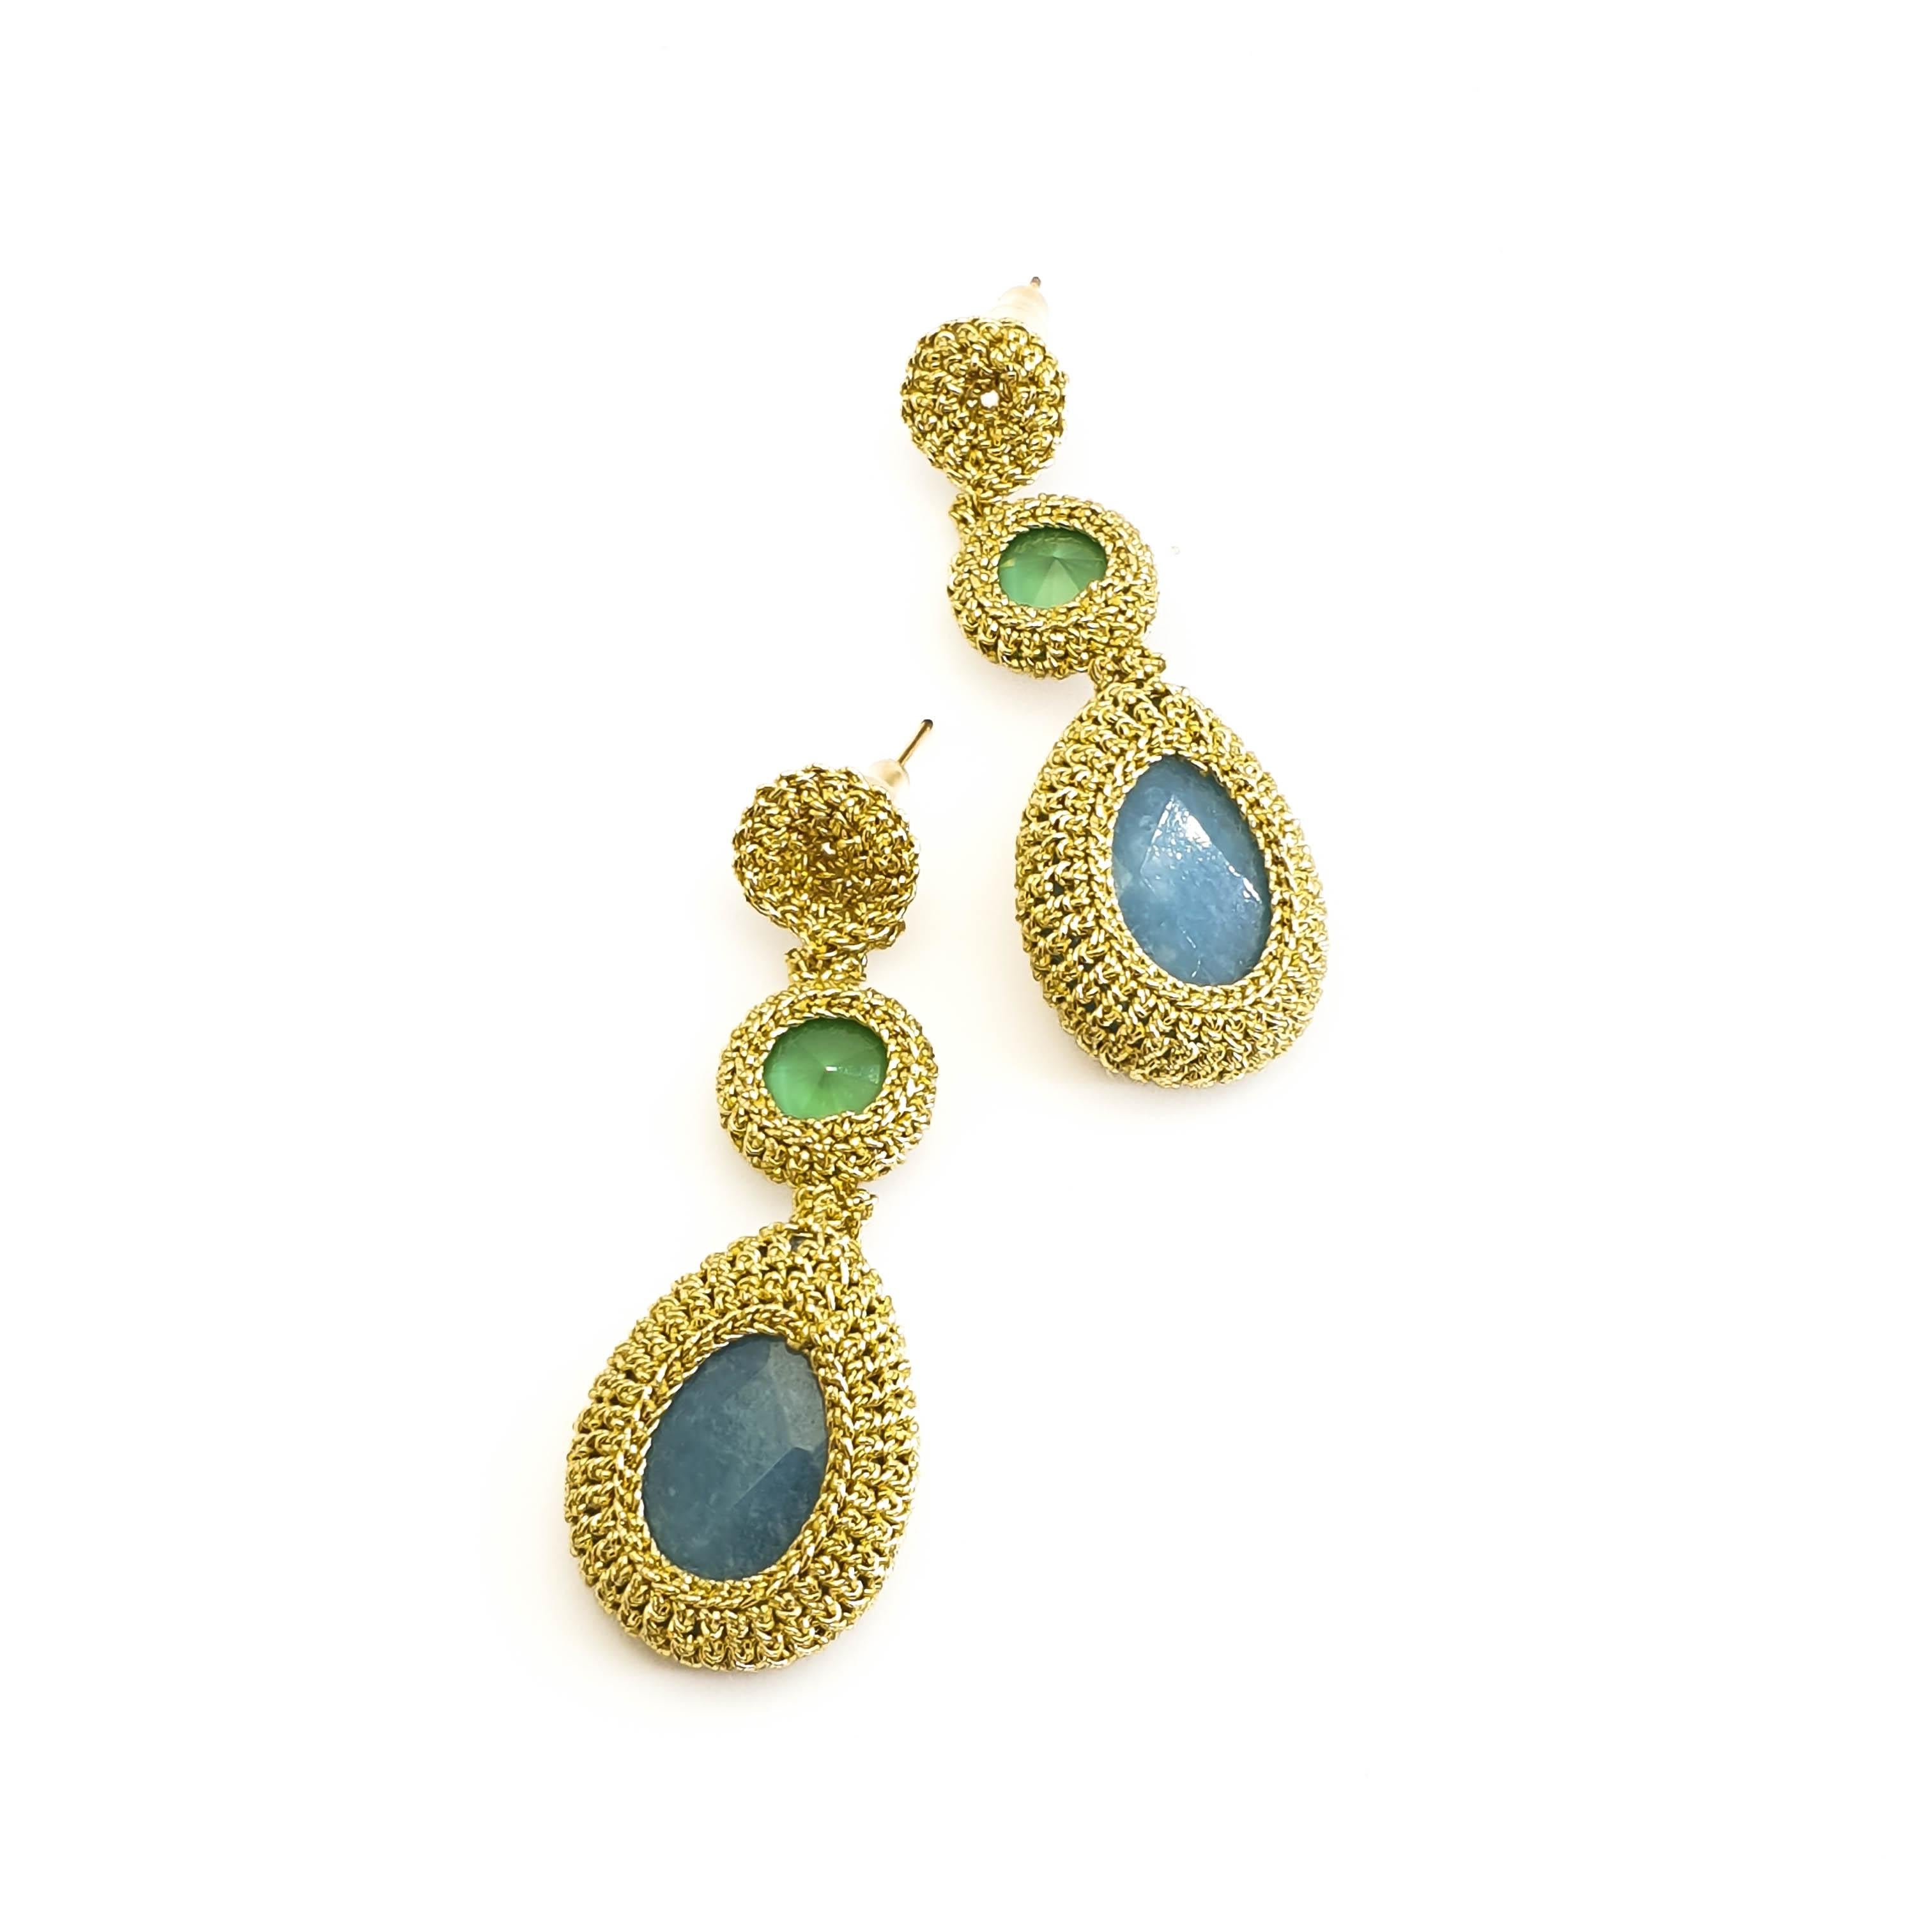 Fashionable, eye catching crochet earrings. Gold color thread tightly crochet around blue jades and vintage green Swarovski crystals.
These earrings can be custom made. Choice of stones can be altered.

The earrings are crochet with a smooth passing